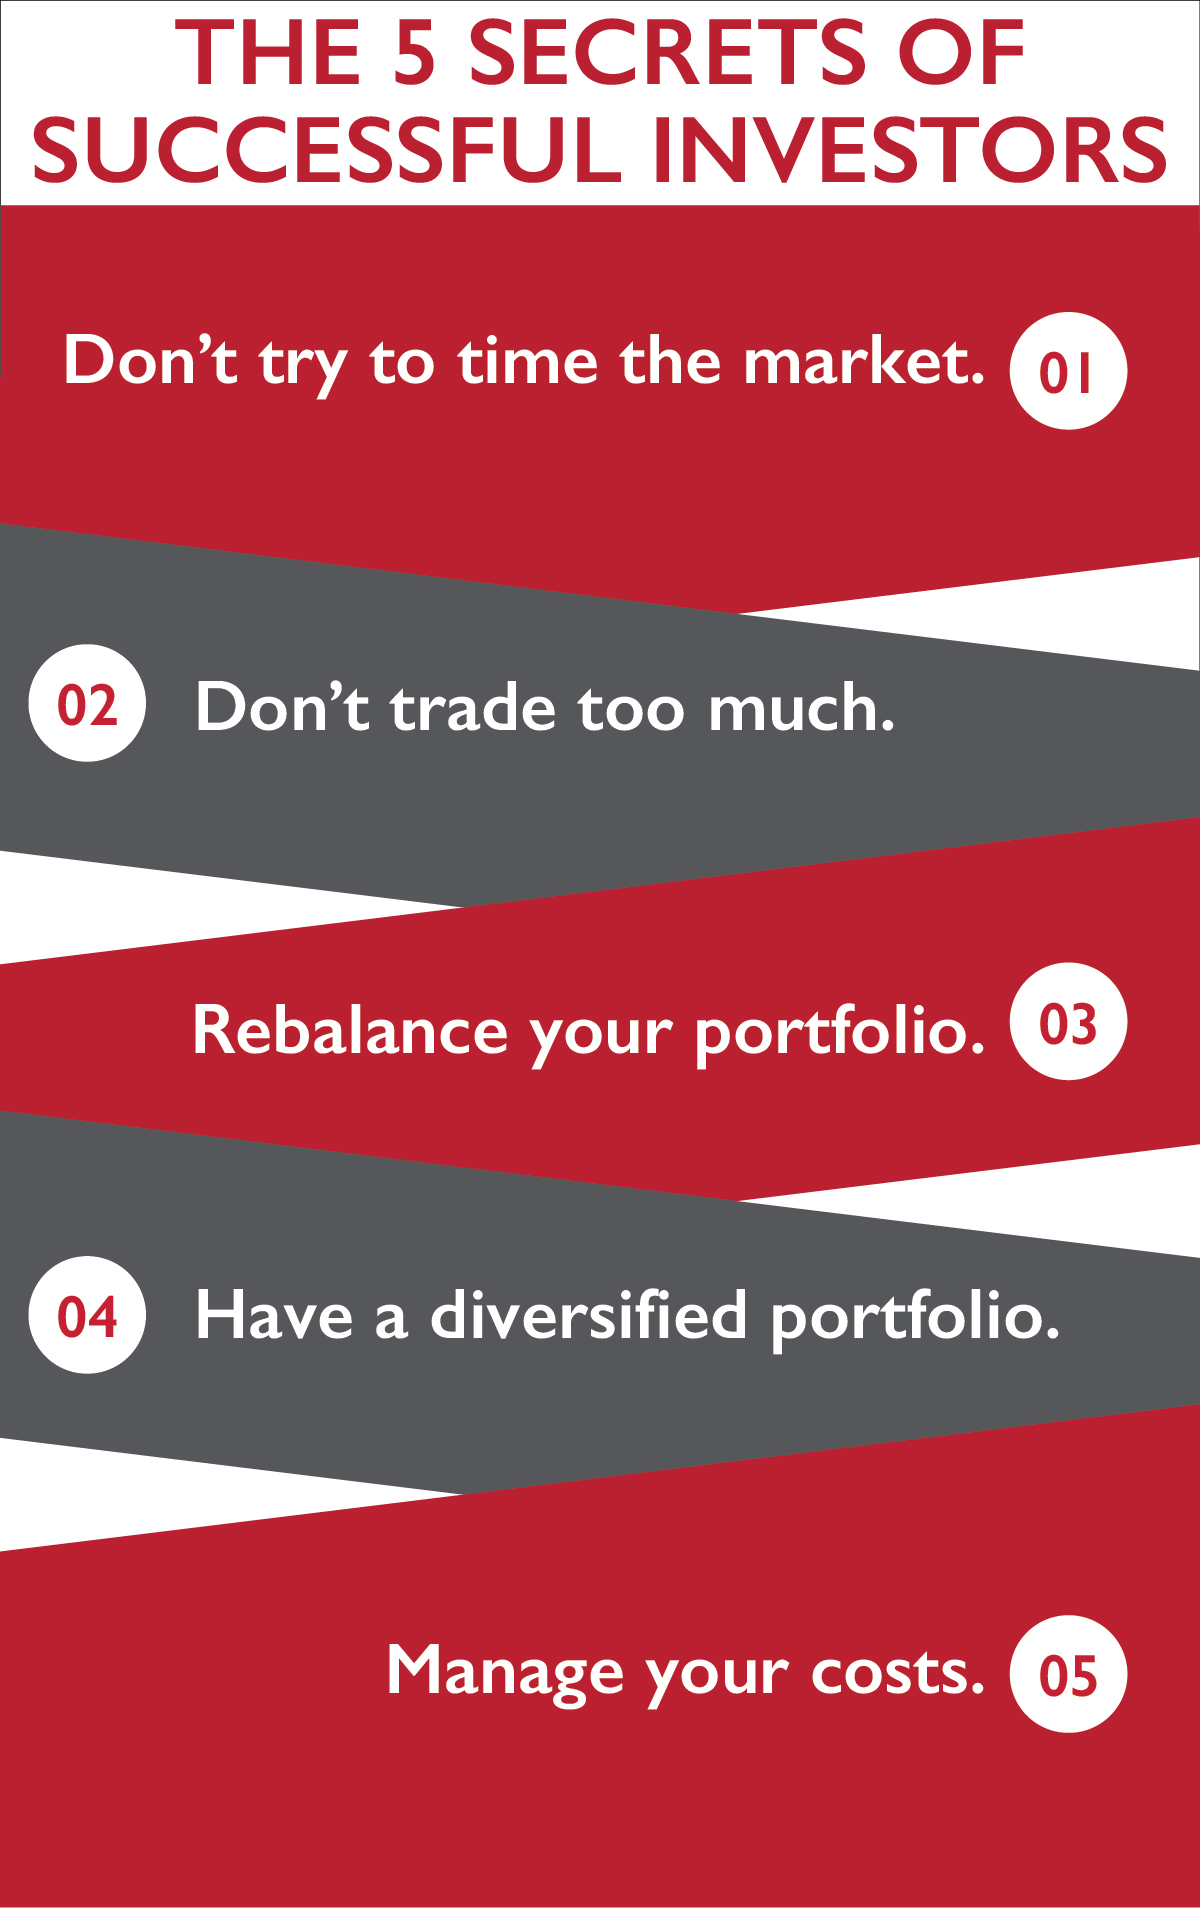 The five secrets of successful investors. One: Don't try to time the market. Two: Don't trade too much. Three: Rebalance your portfolio. Four: Have a diversified portfolio. Five: Manage your costs.